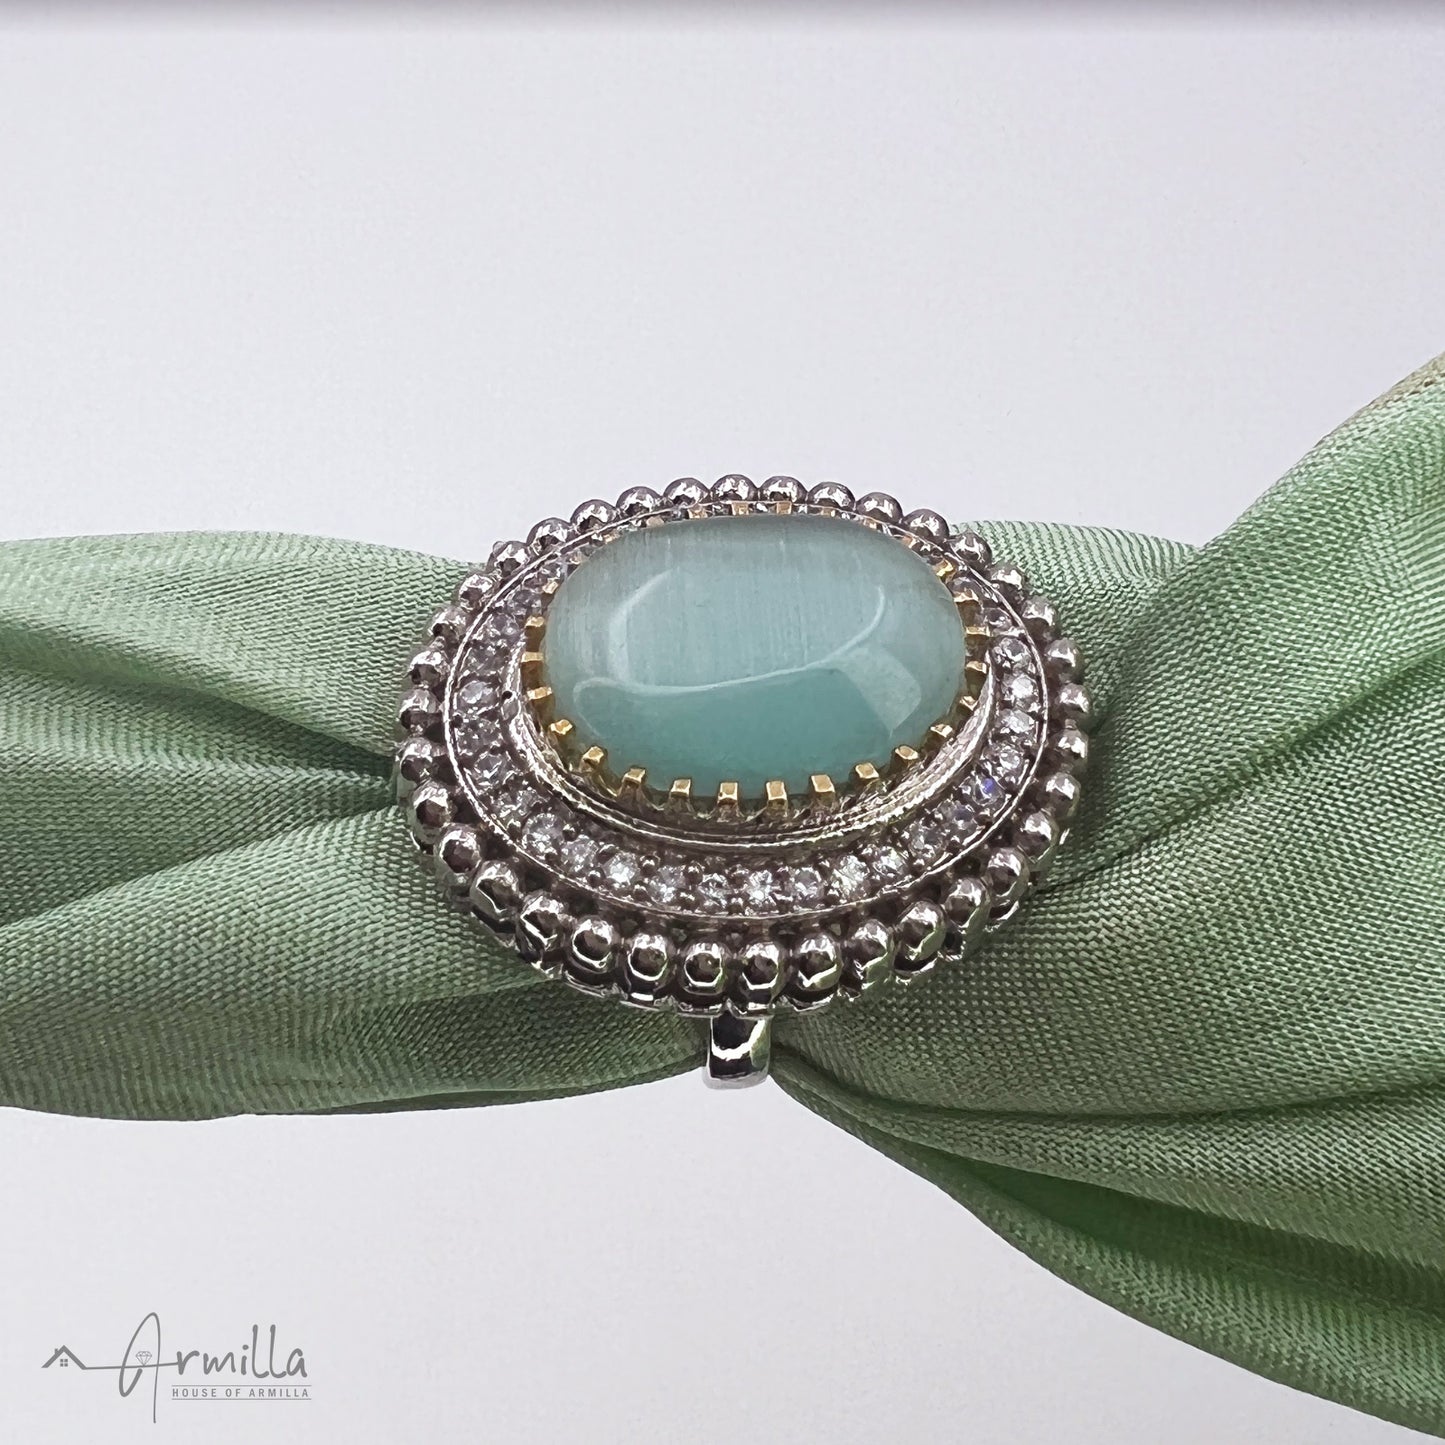 Mint Green Oval Shaped Stone Ring